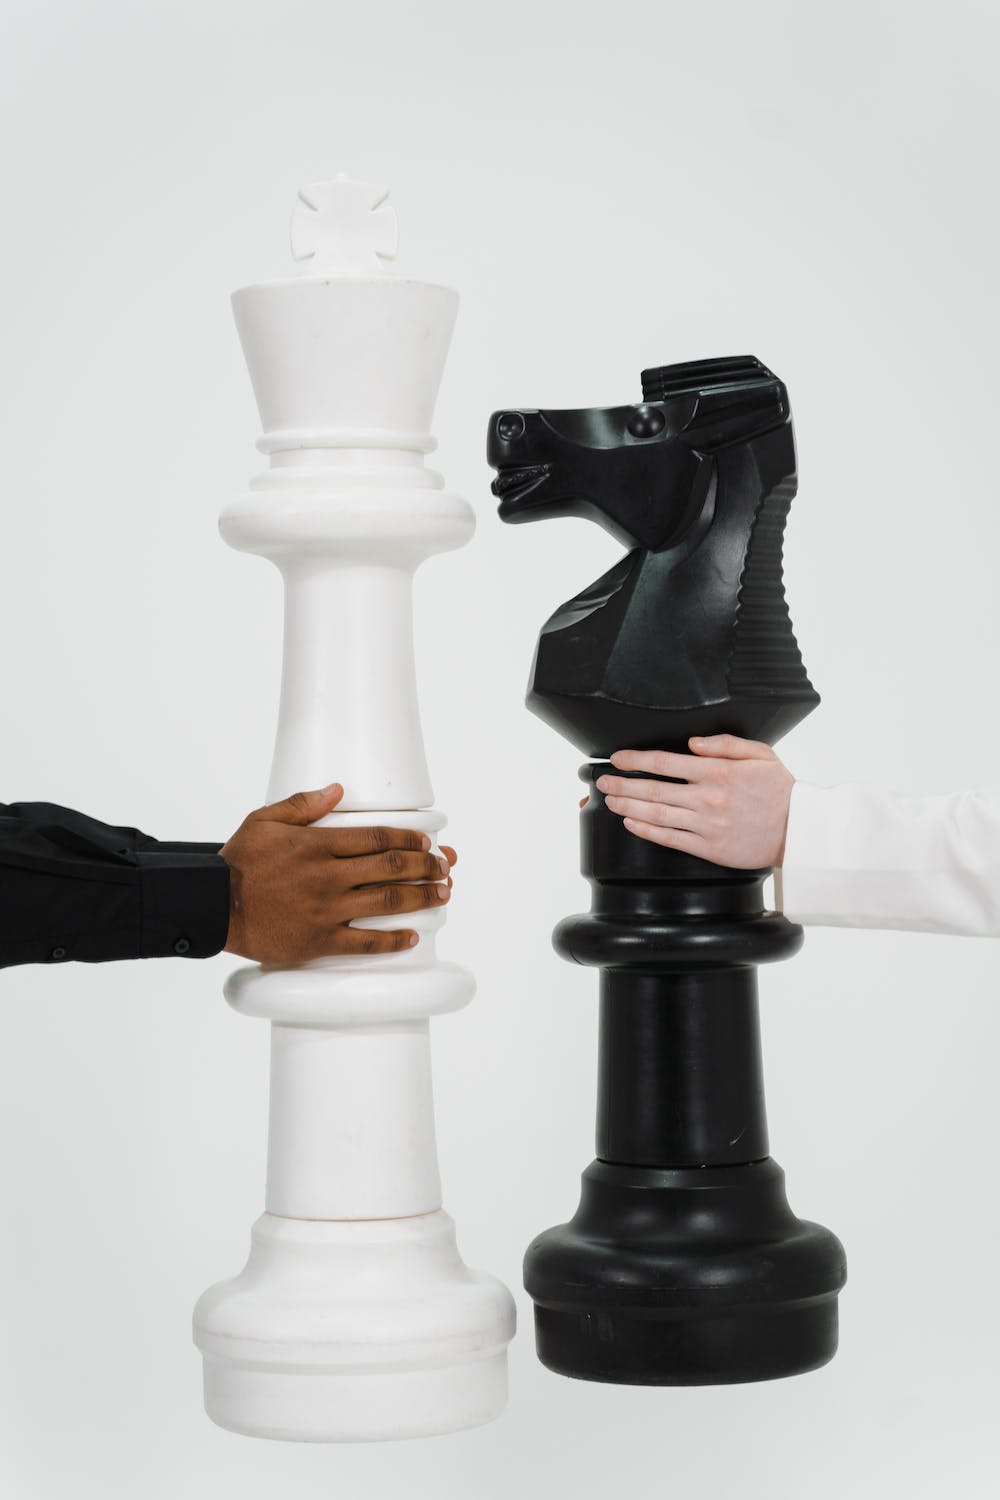 What is the scholar's mate in chess and how can you avoid it